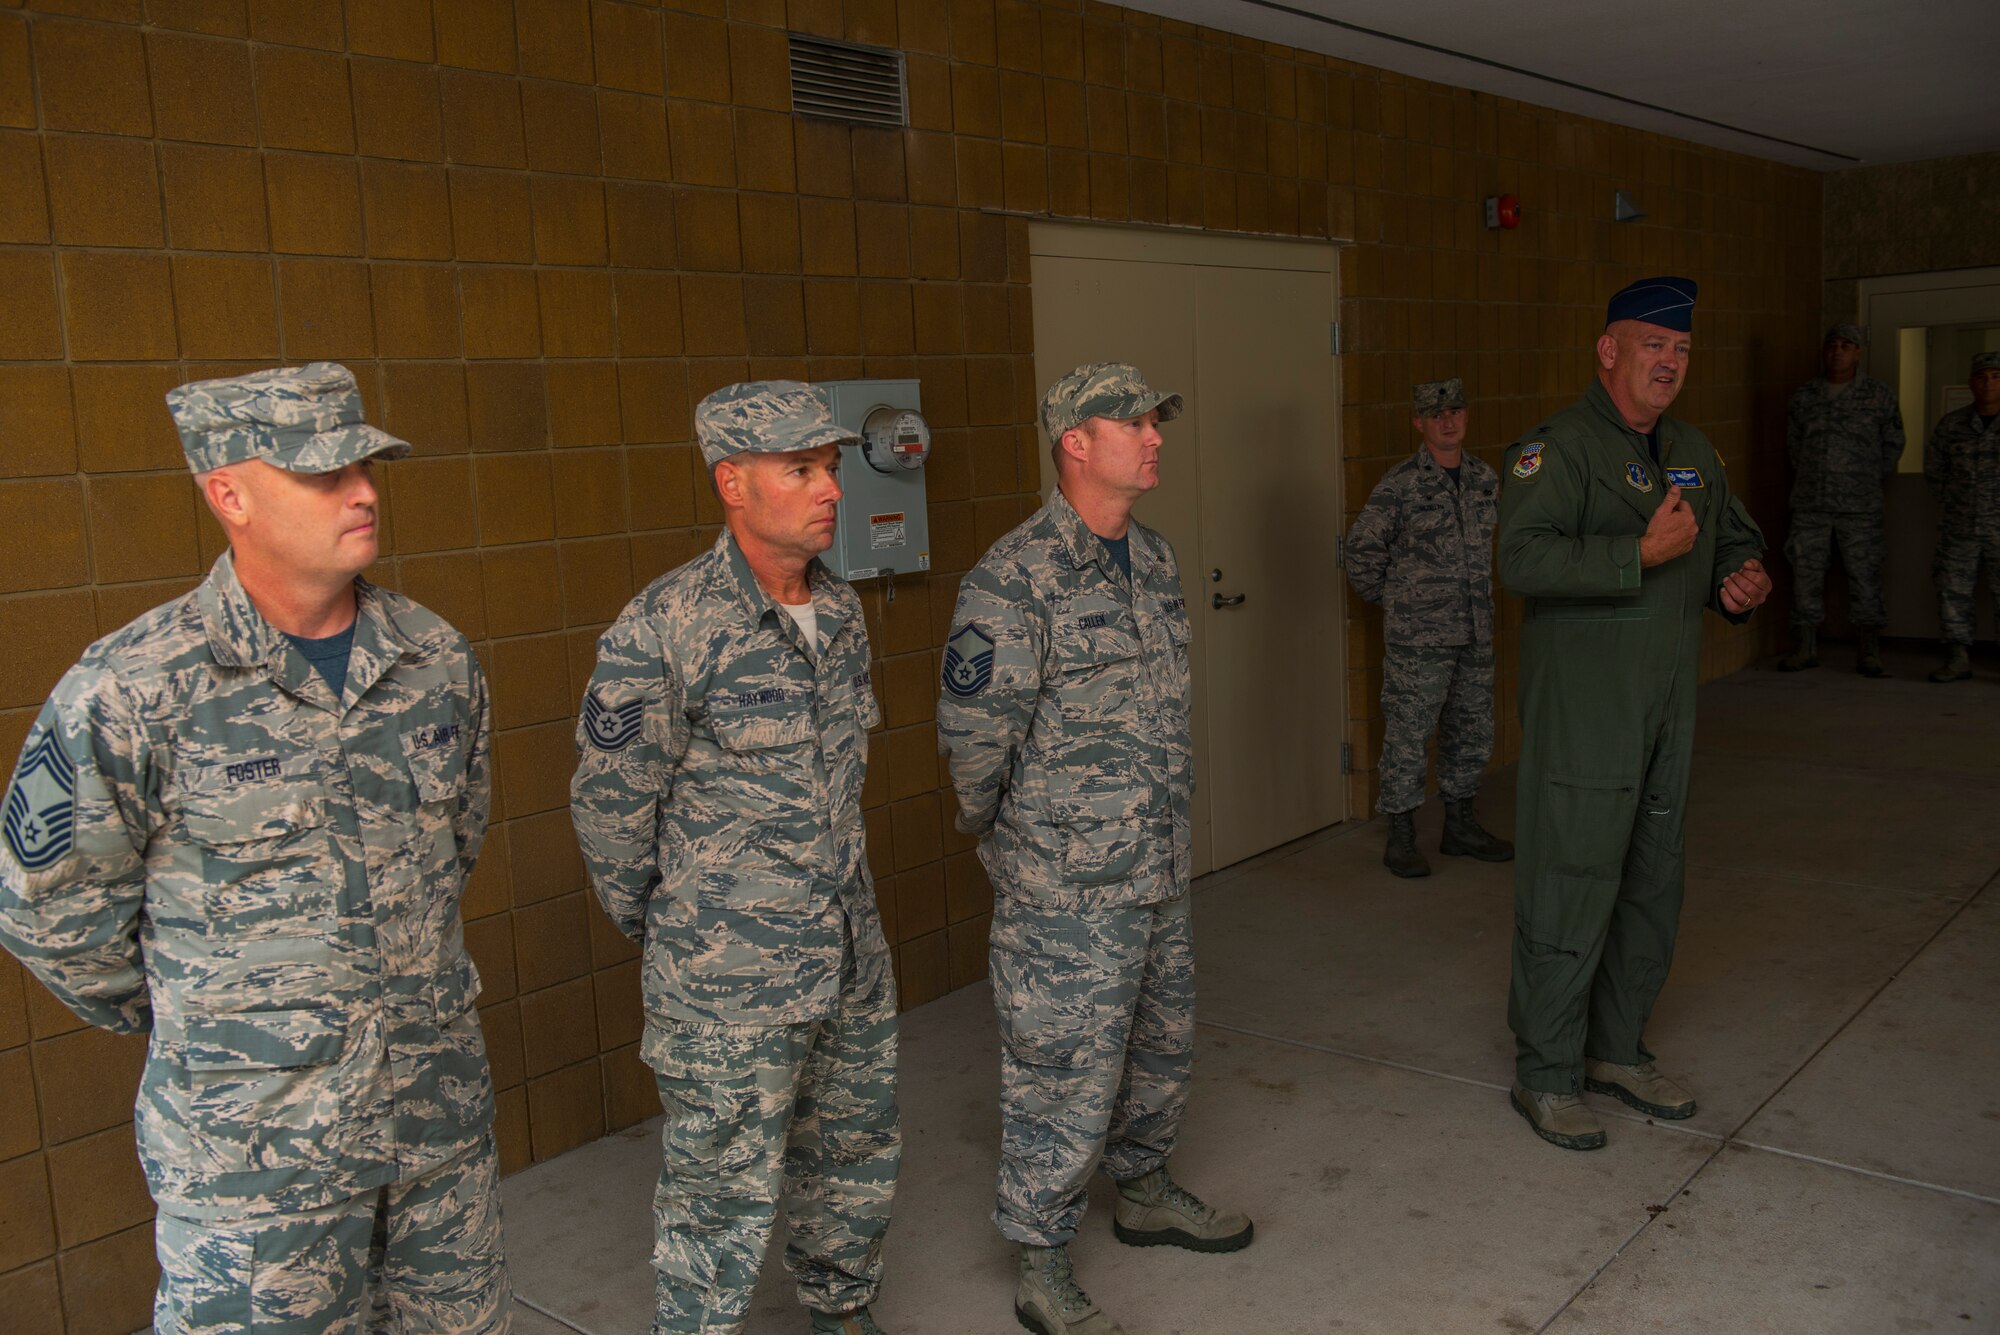 Col. Johnny Ryan, 130th Airlift Wing Commander, recognizes Chief Master Sgt. Steven Foster (left), Tech Sgt. Mark Haywood, and Master Sgt. Jeremy Callen all from the 130th Civil Engineering Squadron, for saving the life of Master Sgt. Bruce Chatterton (not pictured) who collapsed shortly after his physical fitness test on Aug. 6, 2016.(United States Air National Guard photo/Tech. Sgt. De-Juan Haley)